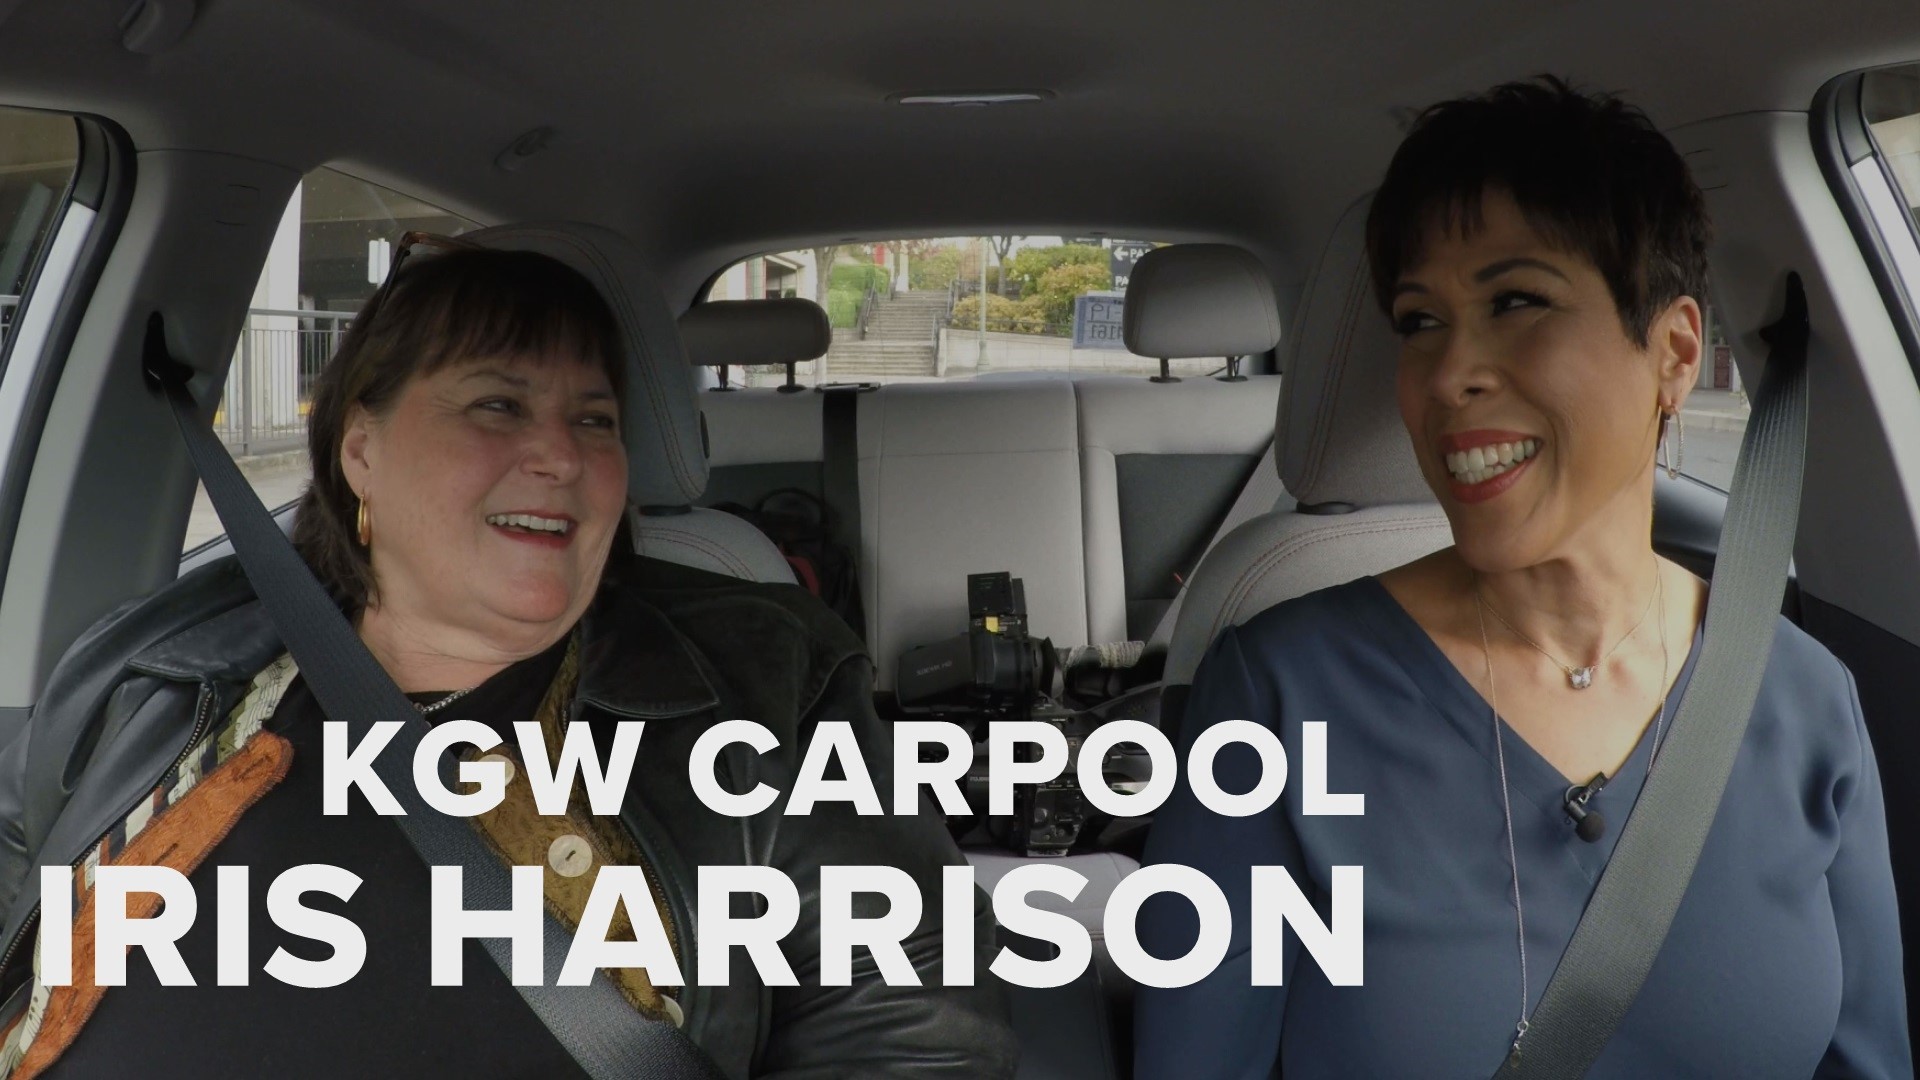 After a 42 year run in Portland, Harrison is ready to retire. She tells Brenda Braxton about the rock royalty she's interviewed and shares her personal photos.